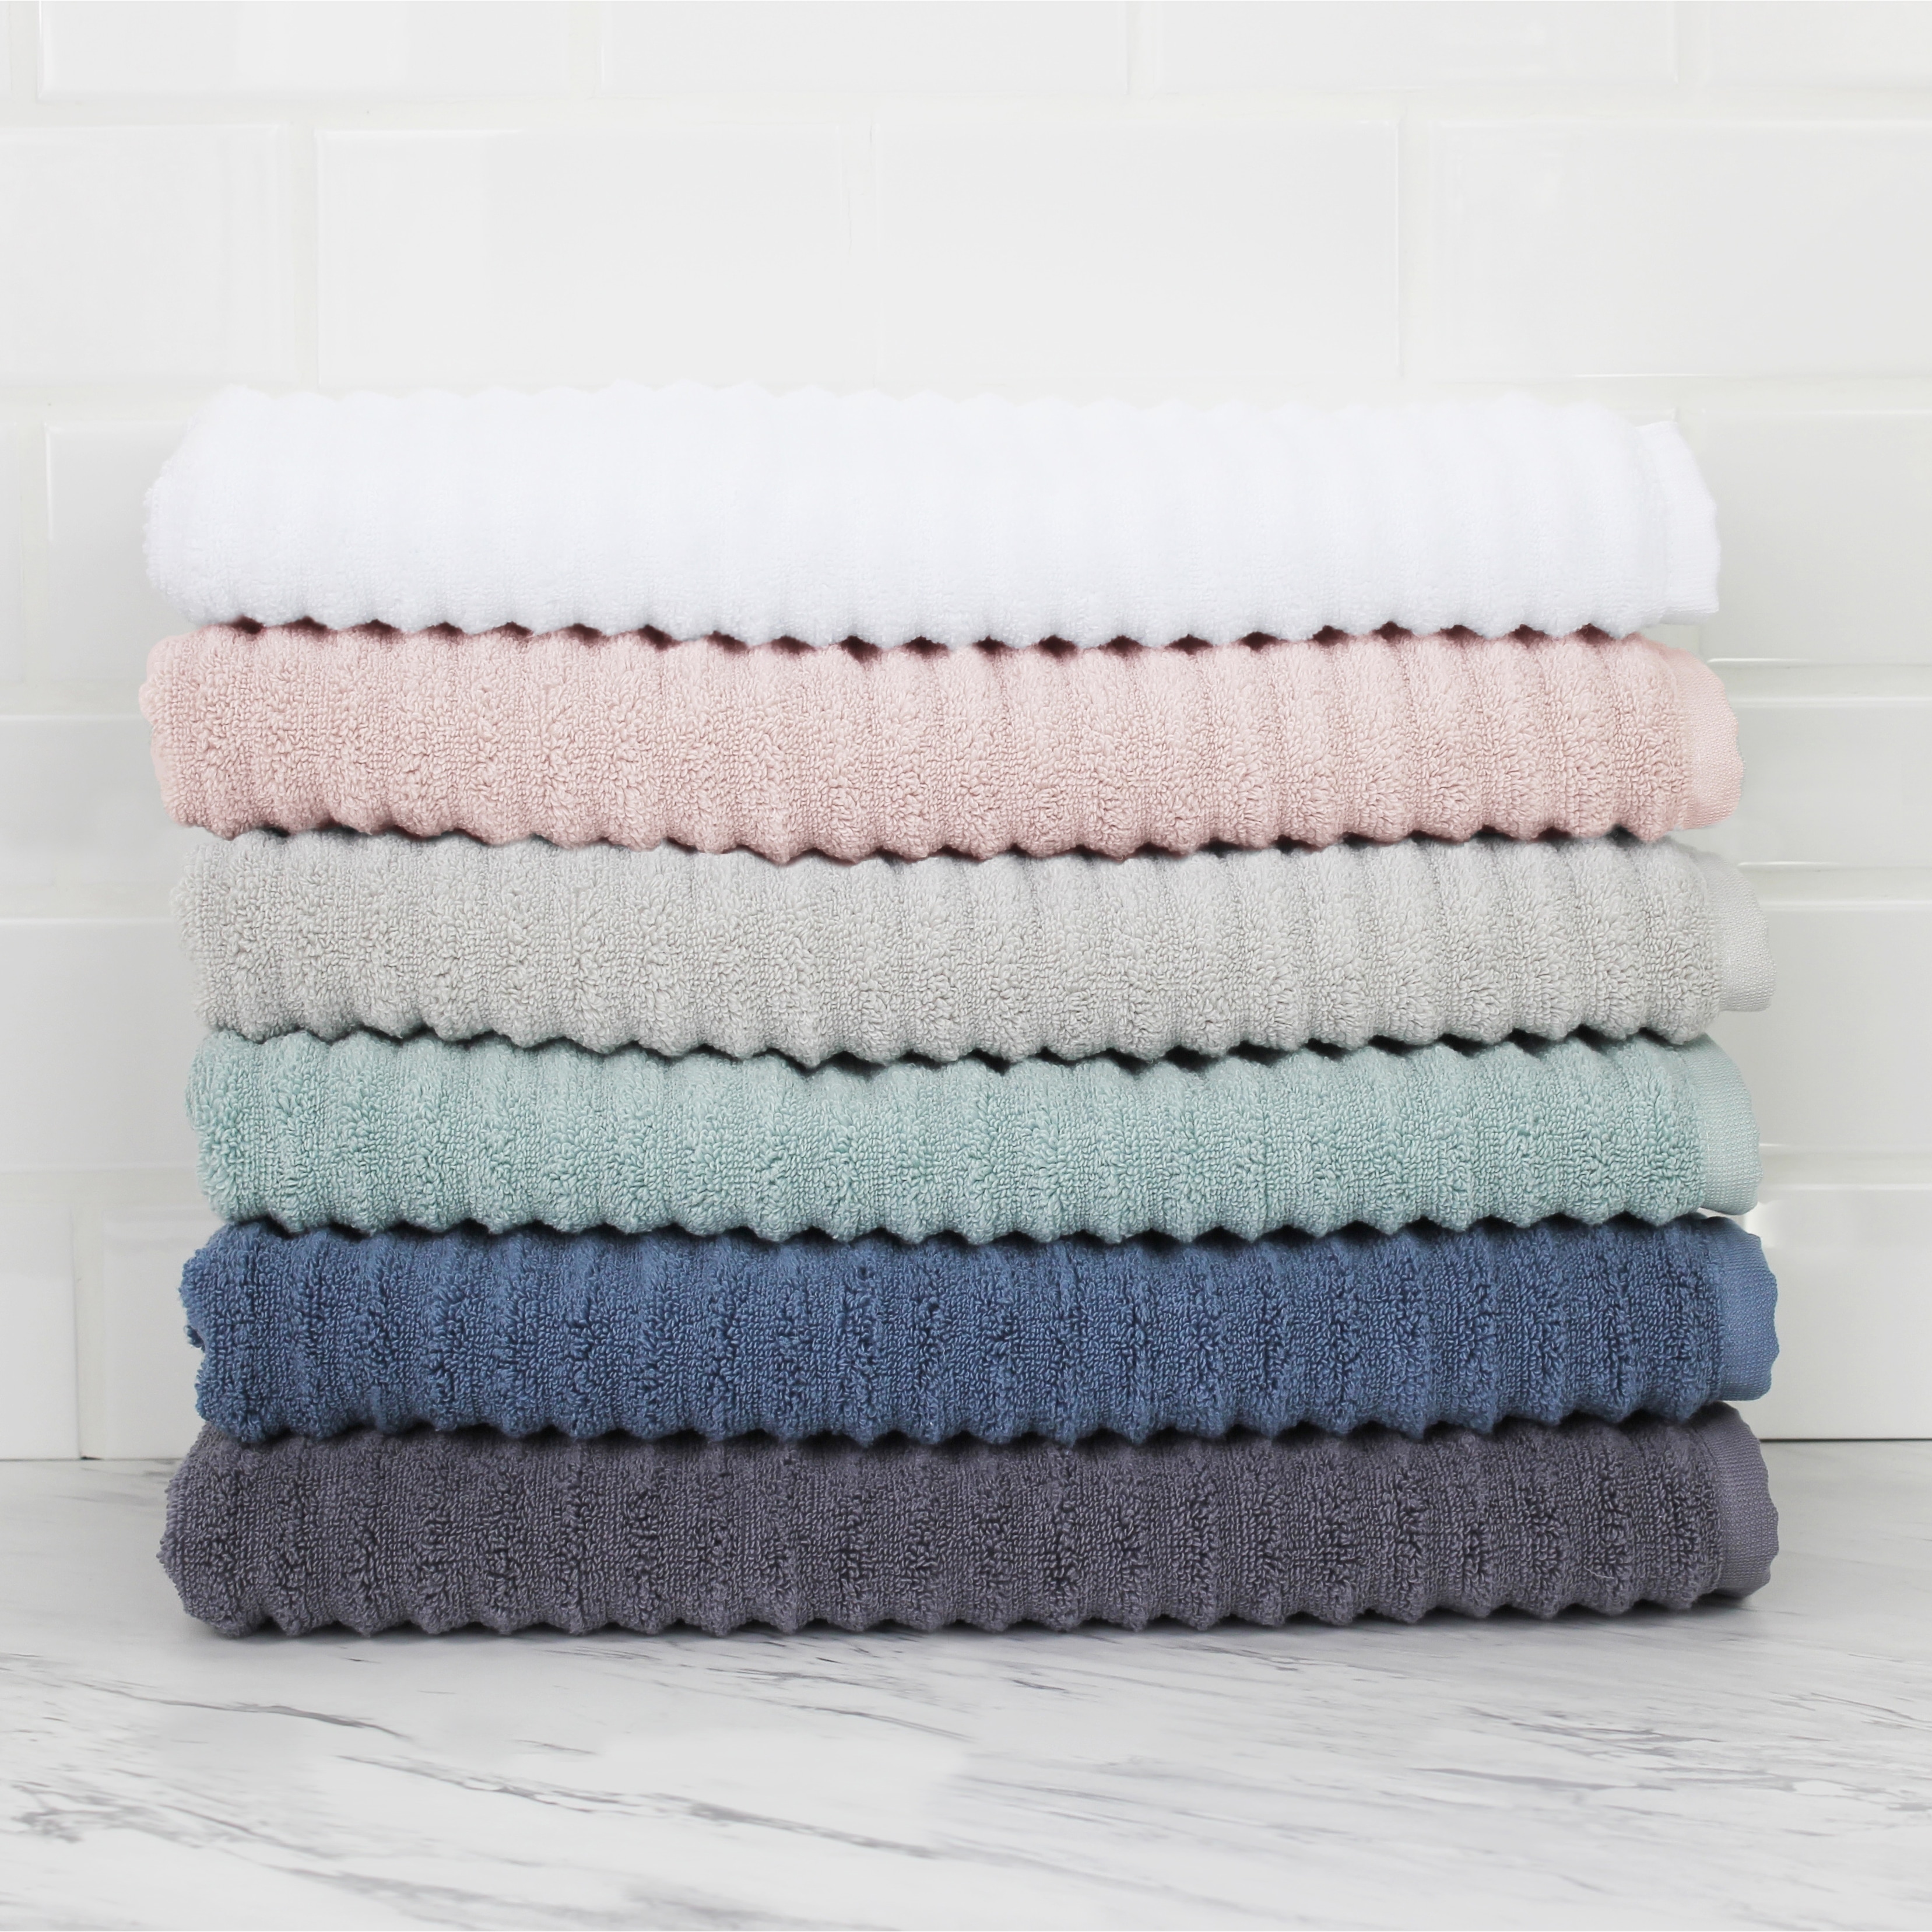 bath towel collections